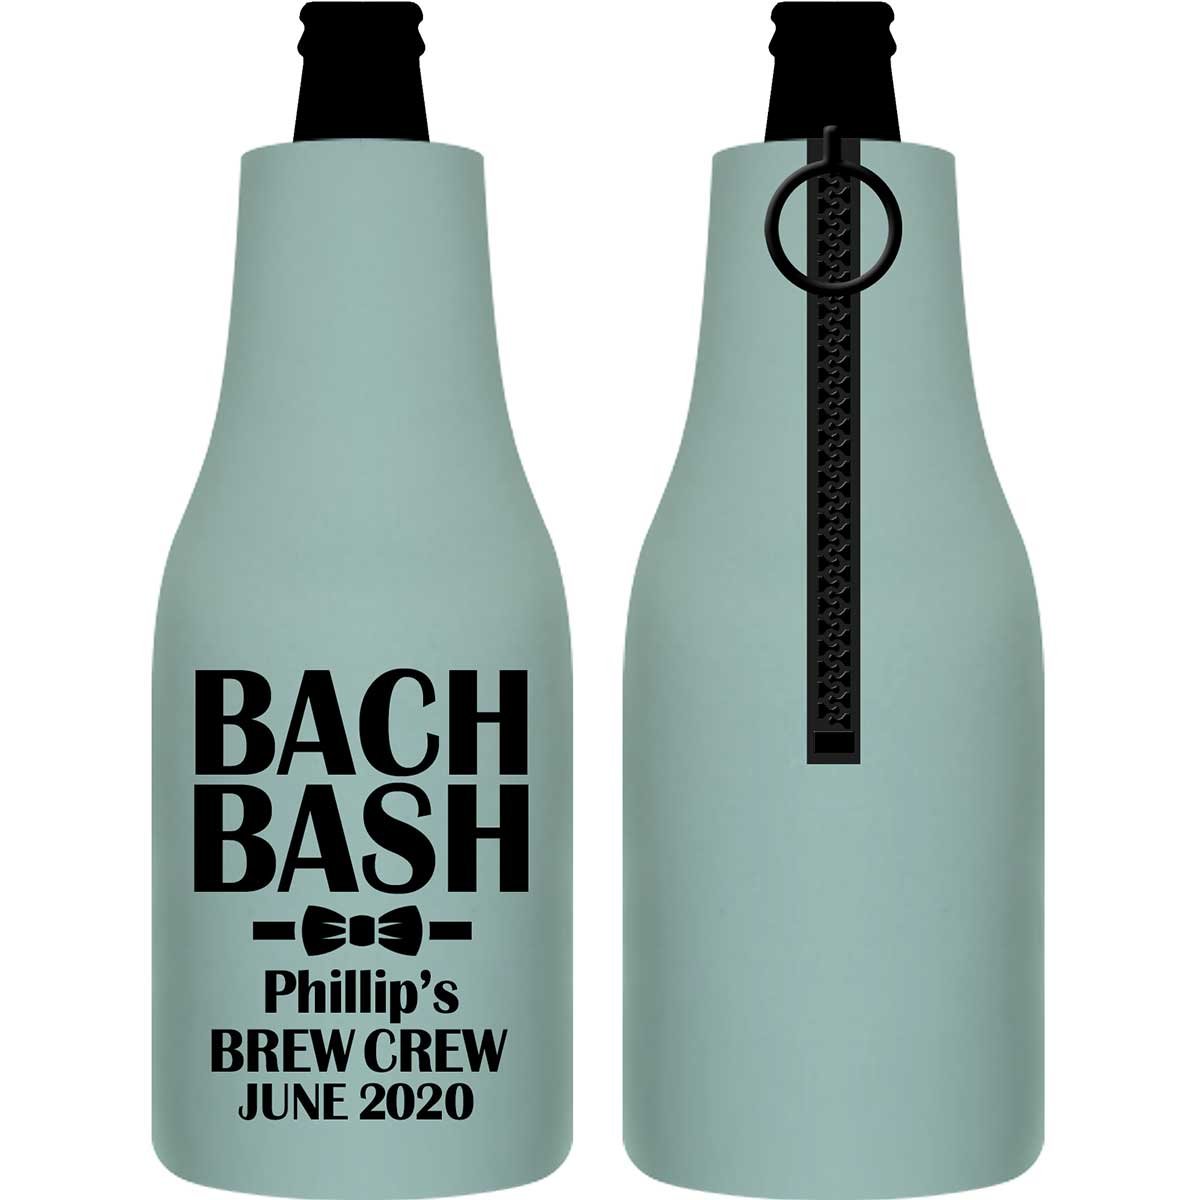 Brew Crew Bachelor Bash 1A Foldable Zippered Bottle Koozies Bachelor Party Gifts for Guests